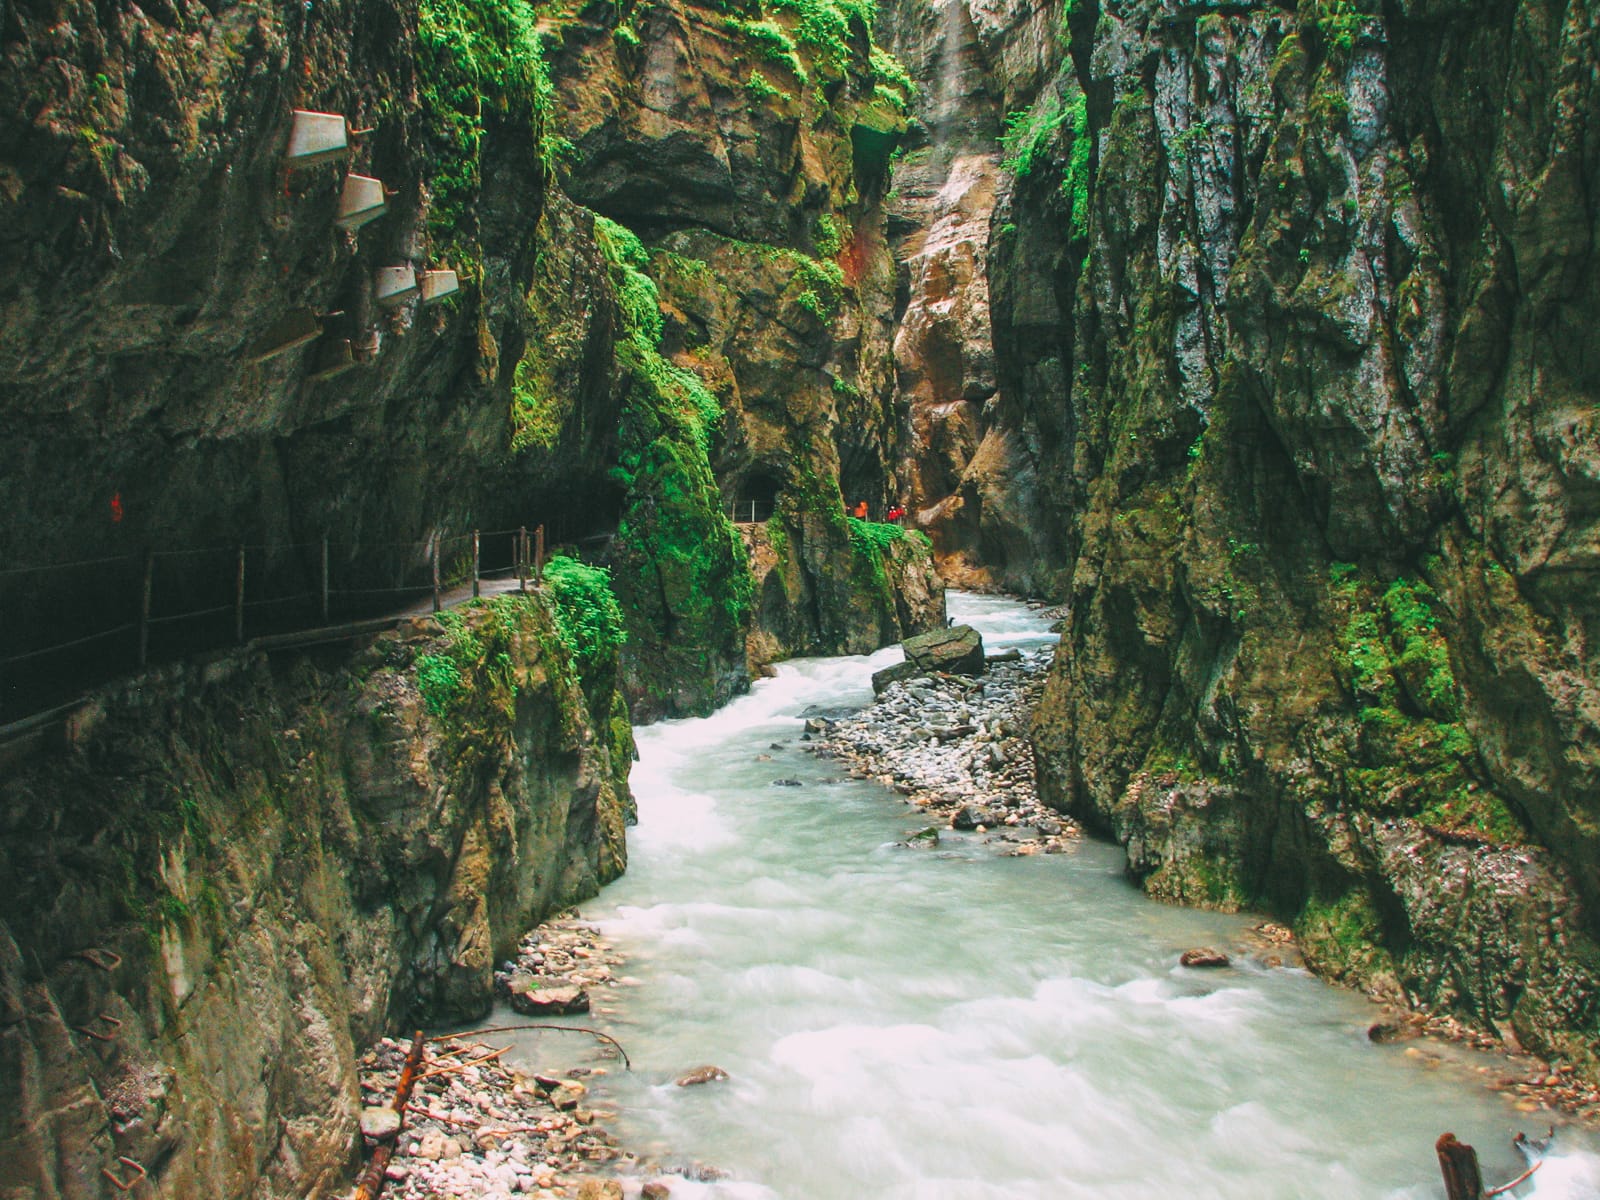 The 12 Best Hikes In Germany You Have To Experience - Partnachklamm Gorge 2